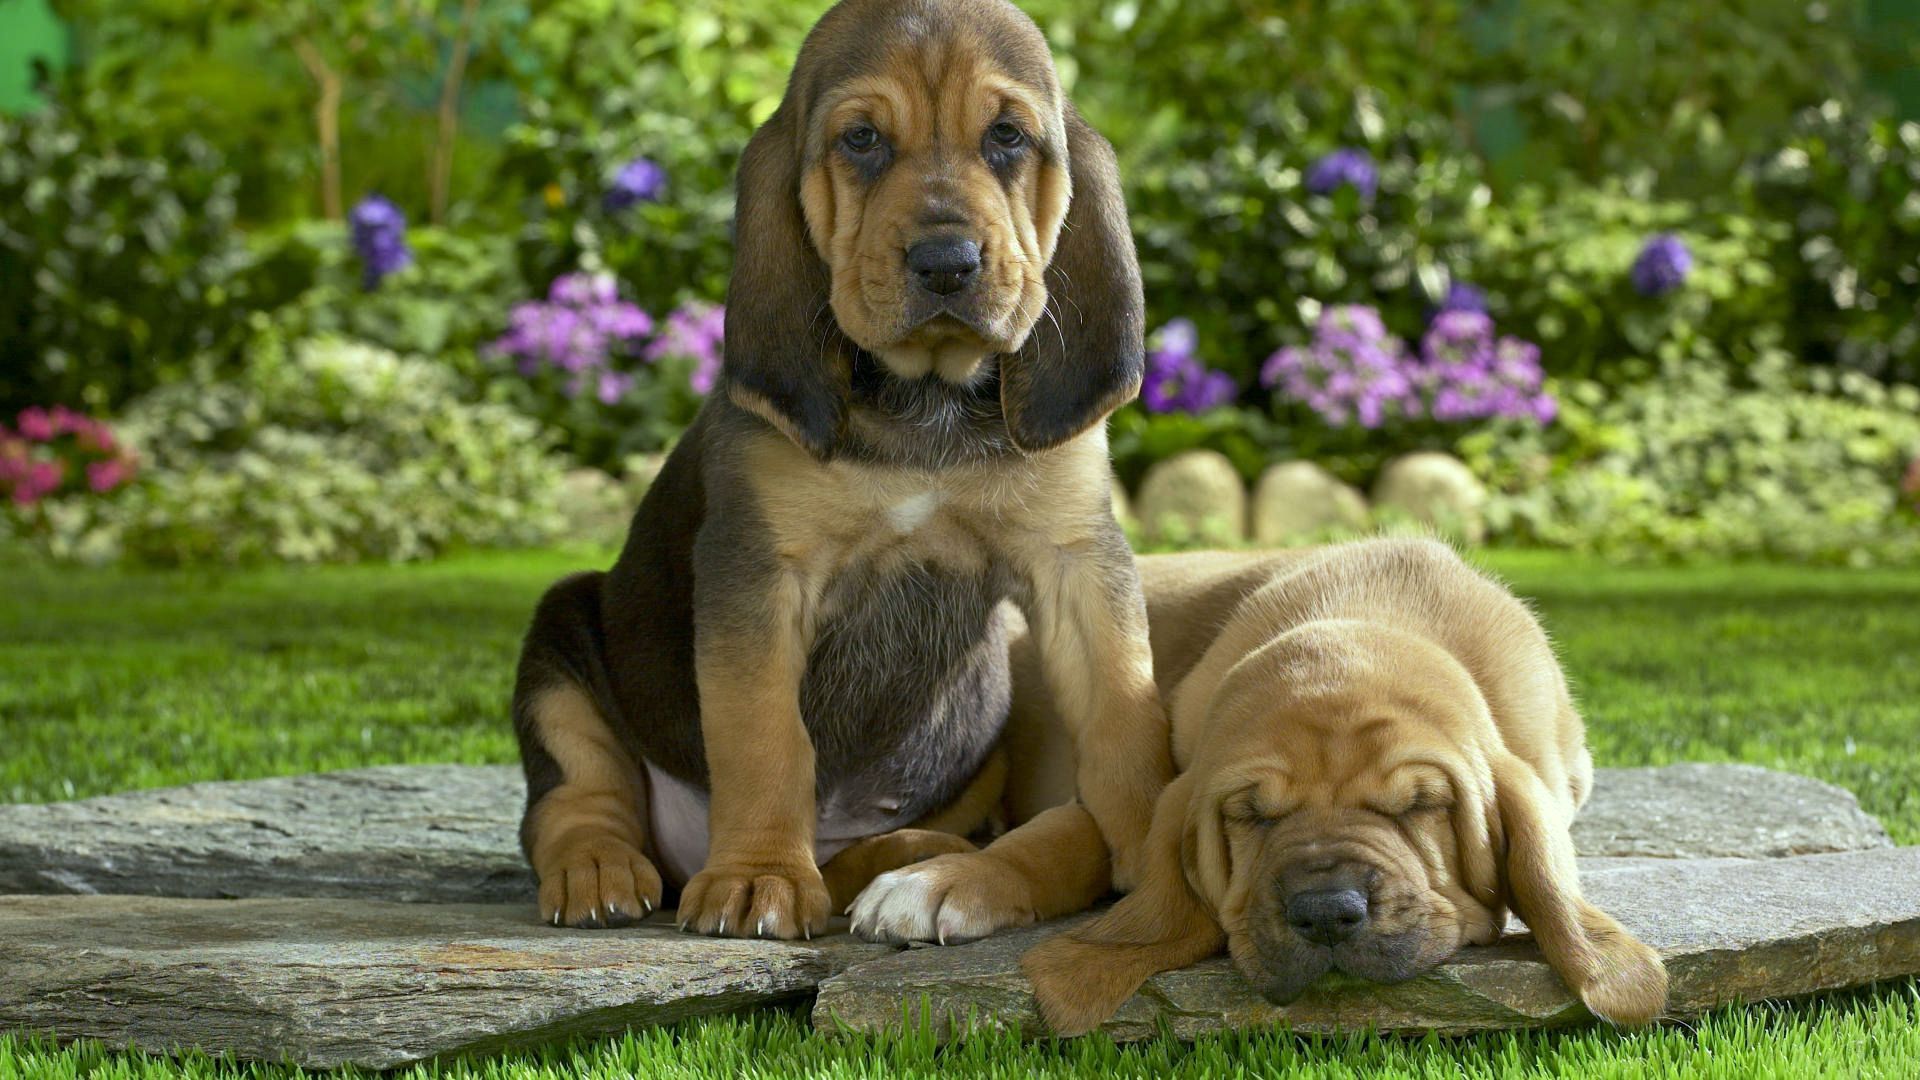 127038 Screensavers and Wallpapers Puppies for phone. Download animals, flowers, grass, couple, pair, to lie down, lie, sleep, dream, puppies pictures for free